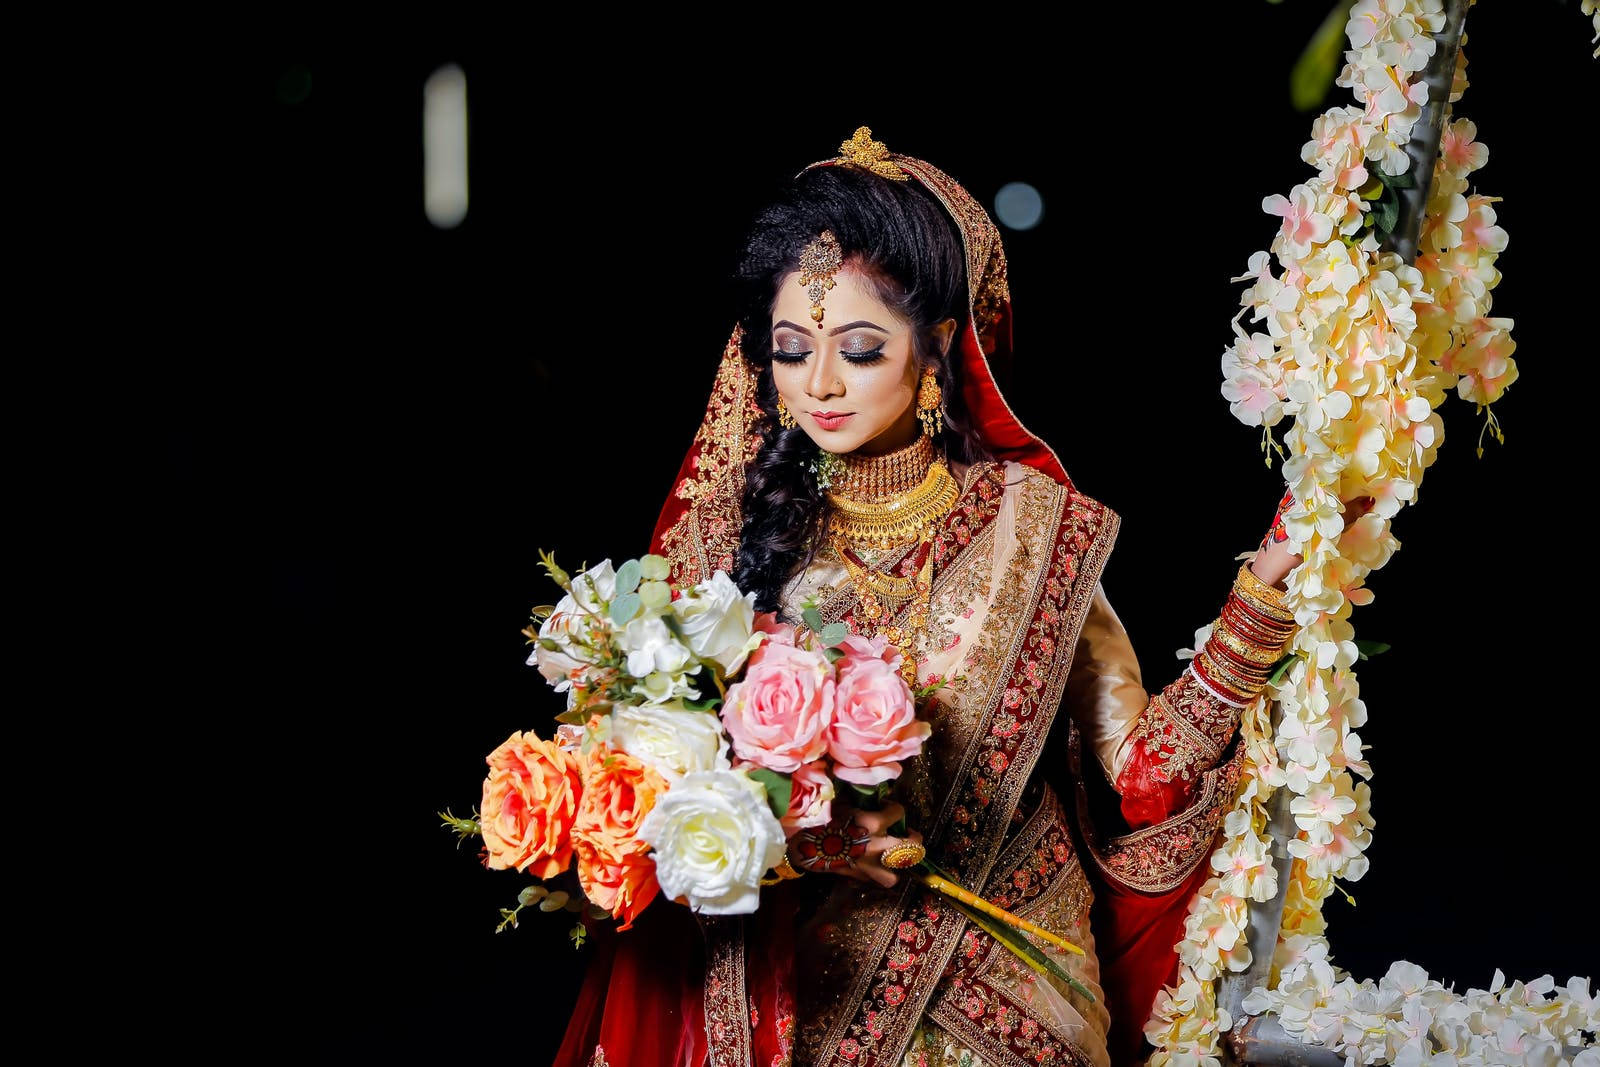 Radiant Indian Bride Holding A Bouquet At Her Wedding